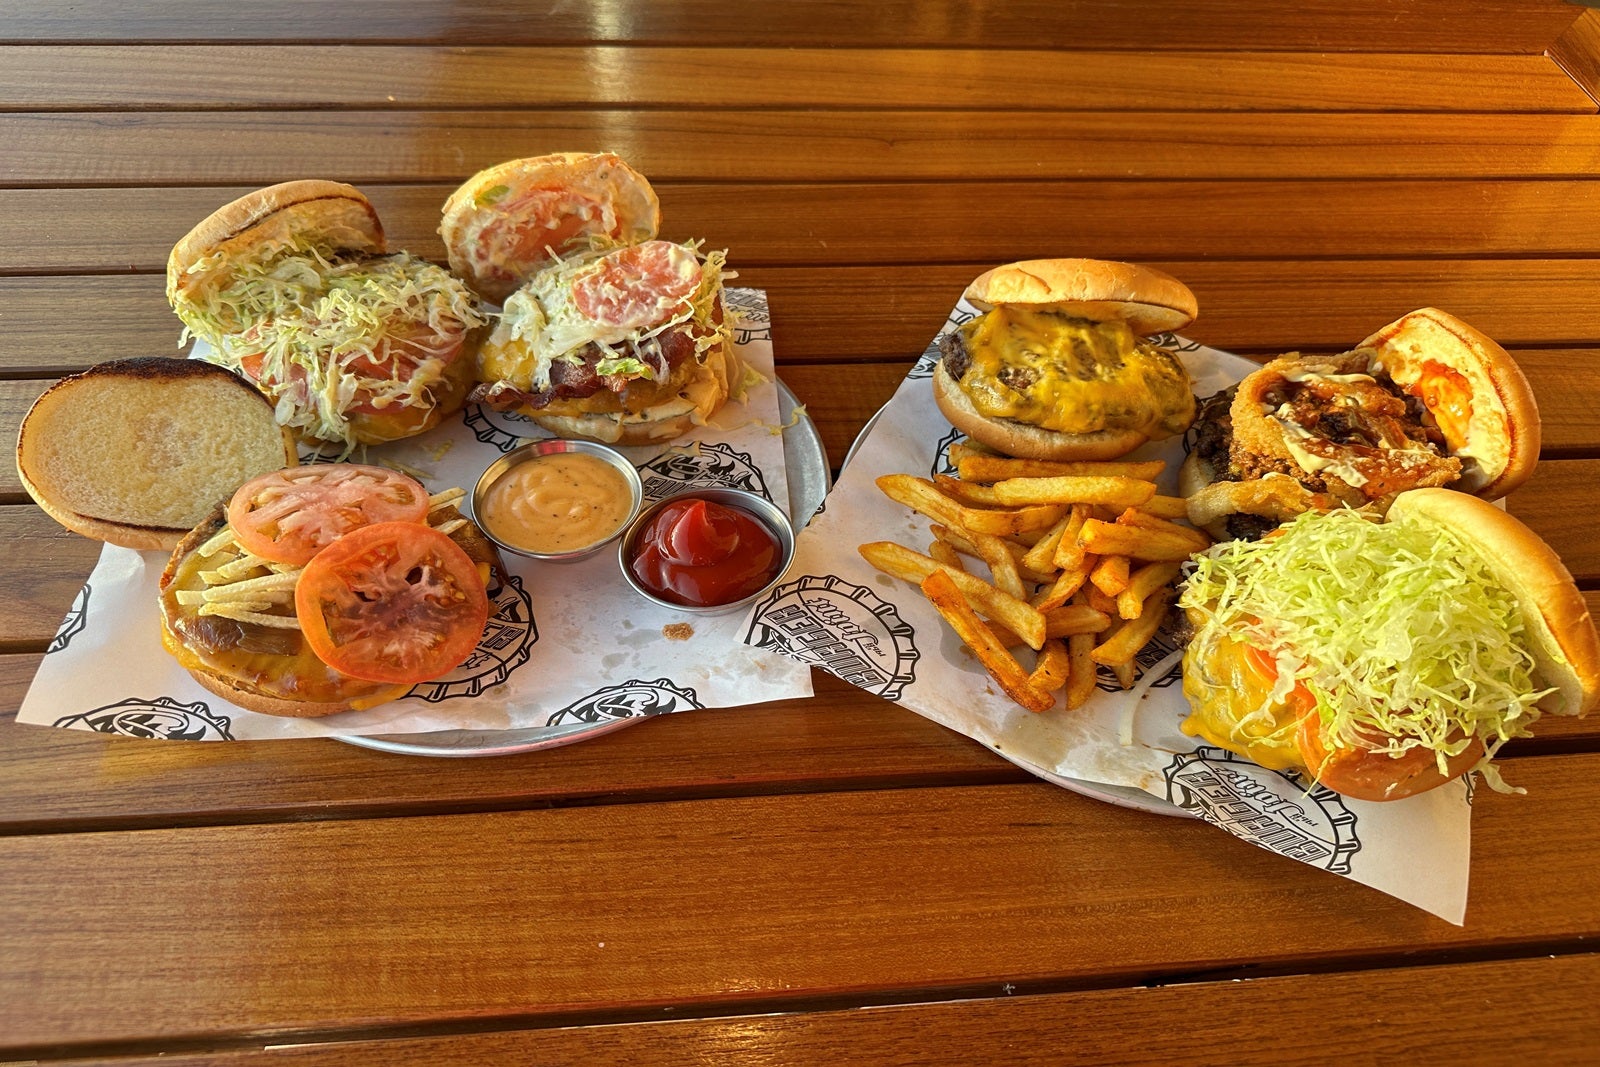 Two sets of three loaded cheeseburgers with fries on two plates on a wooden table